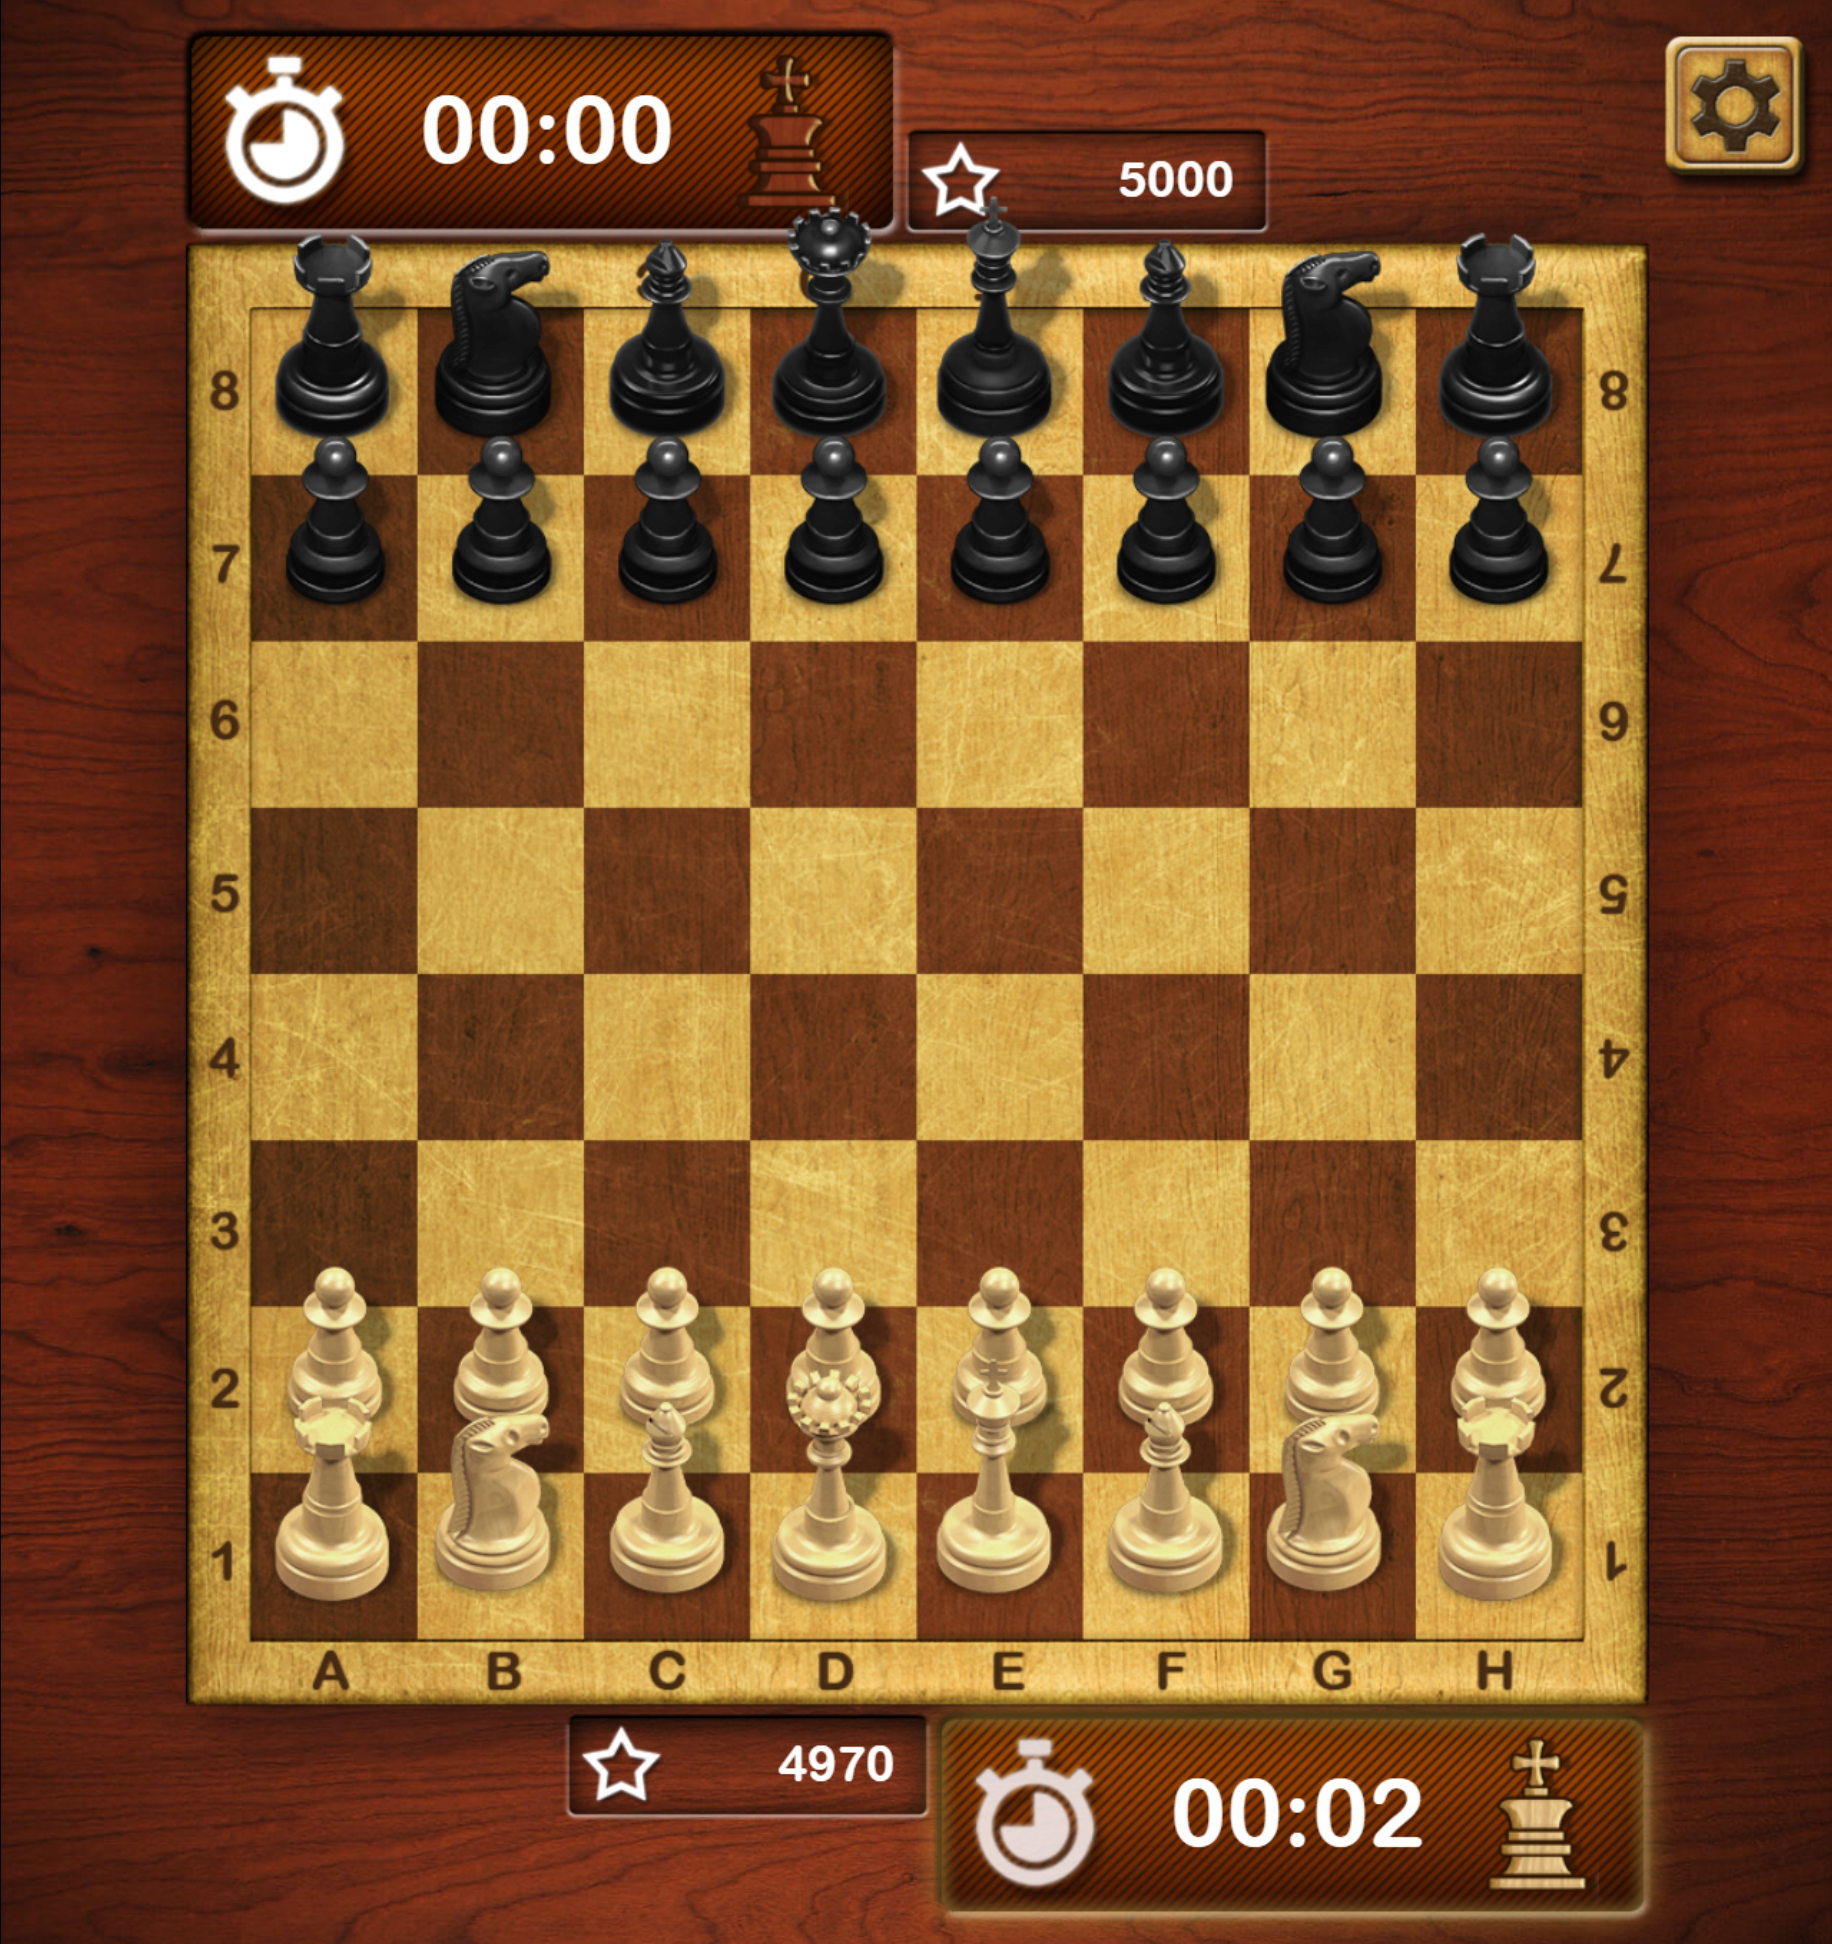 CHESS GAMES ♟️ - Play Online Games!